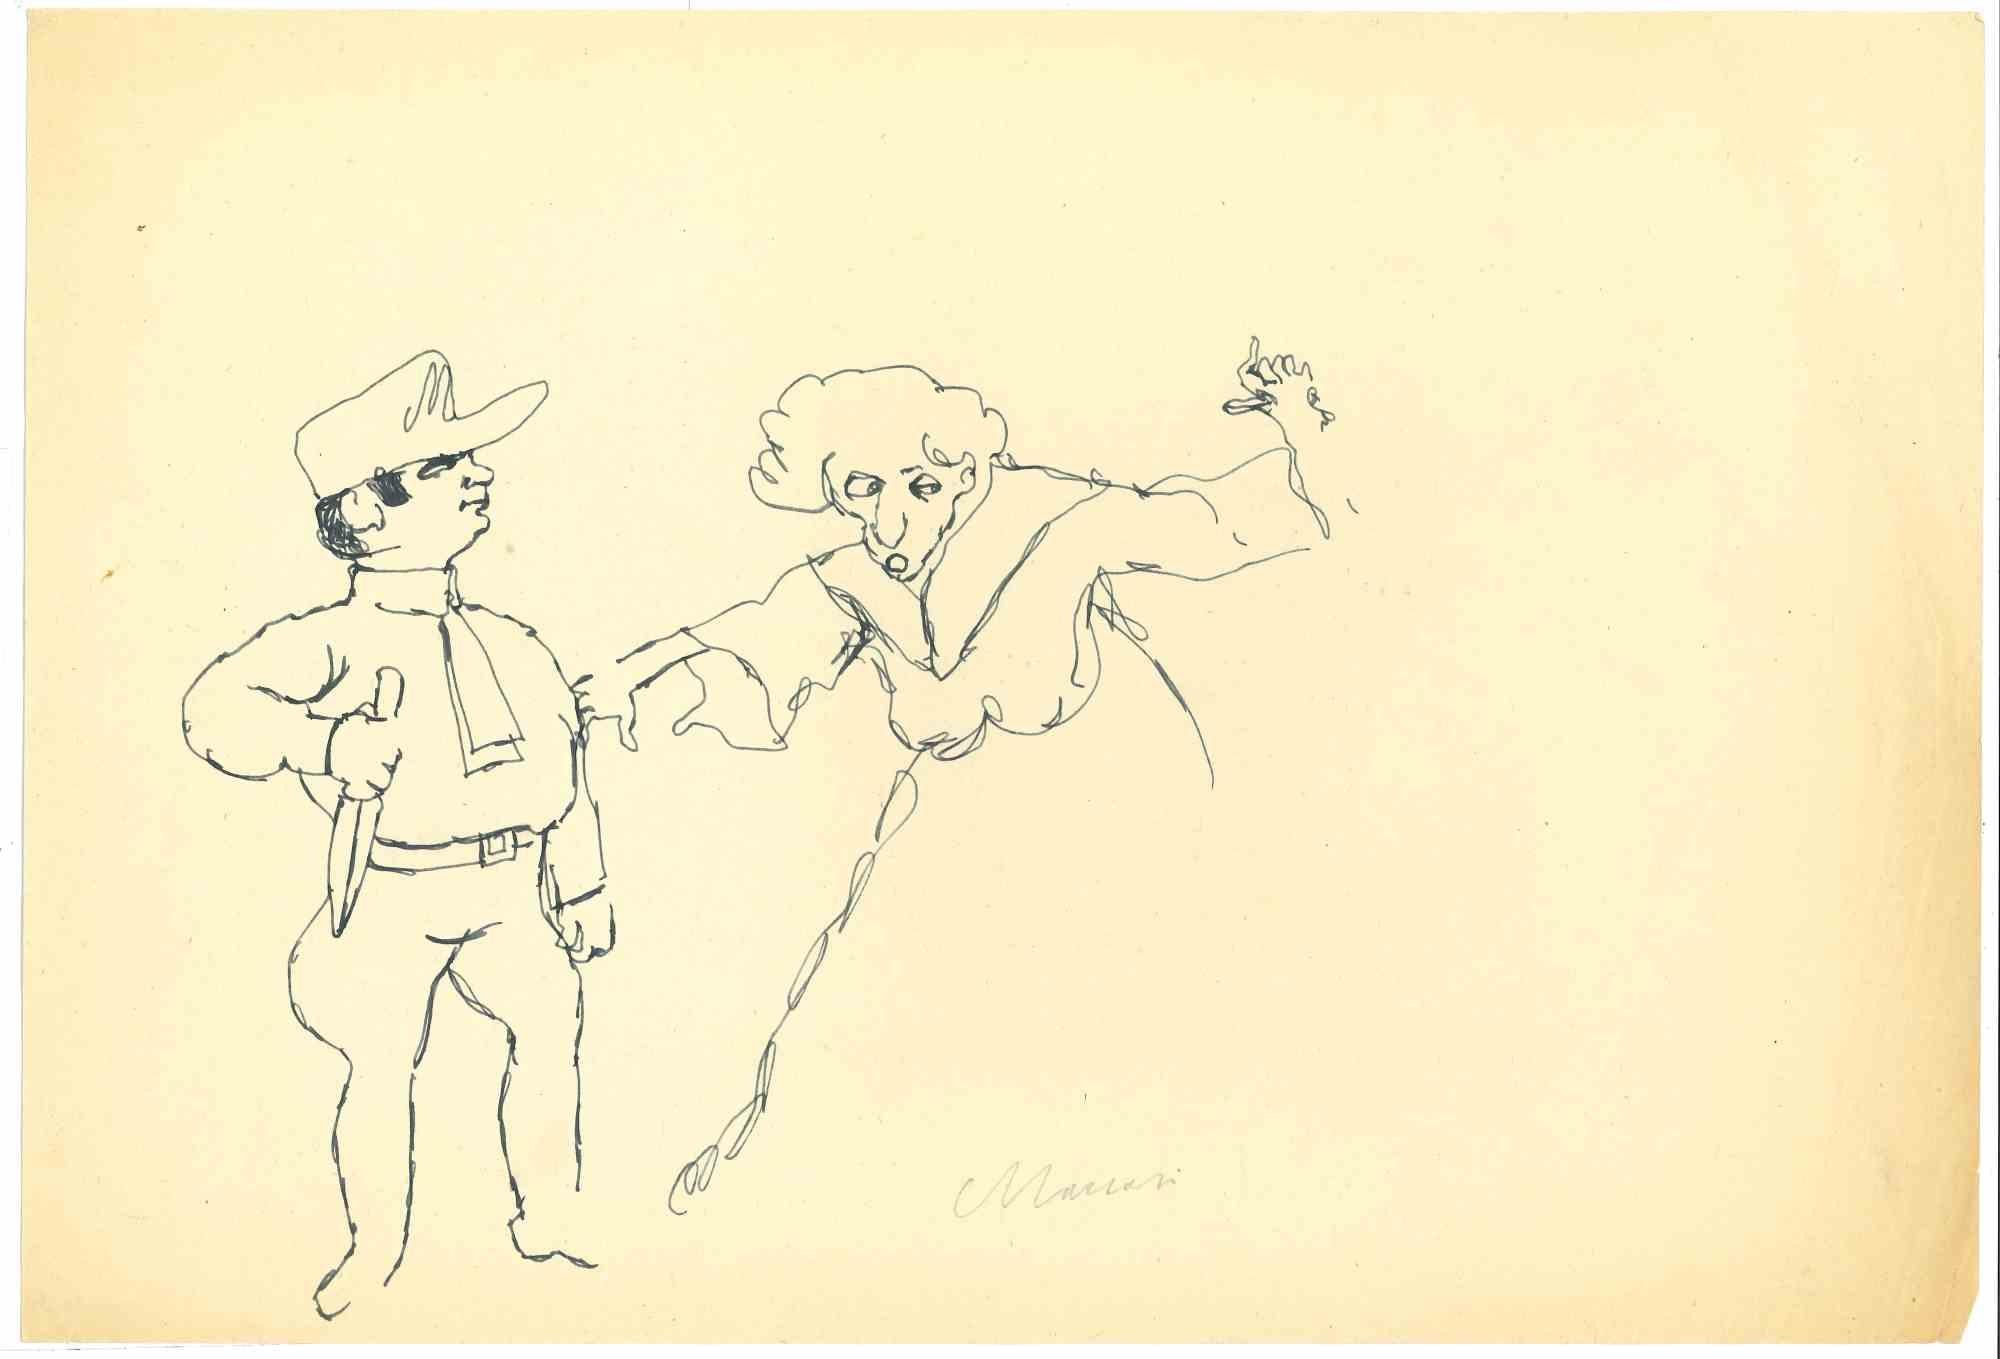 The Old and Soldier is a pen Drawing realized by Mino Maccari  (1924-1989) in the 1950s.

Hand-signed on the lower.

Good condition except for a cut on the right margins.

Mino Maccari (Siena, 1924-Rome, June 16, 1989) was an Italian writer,